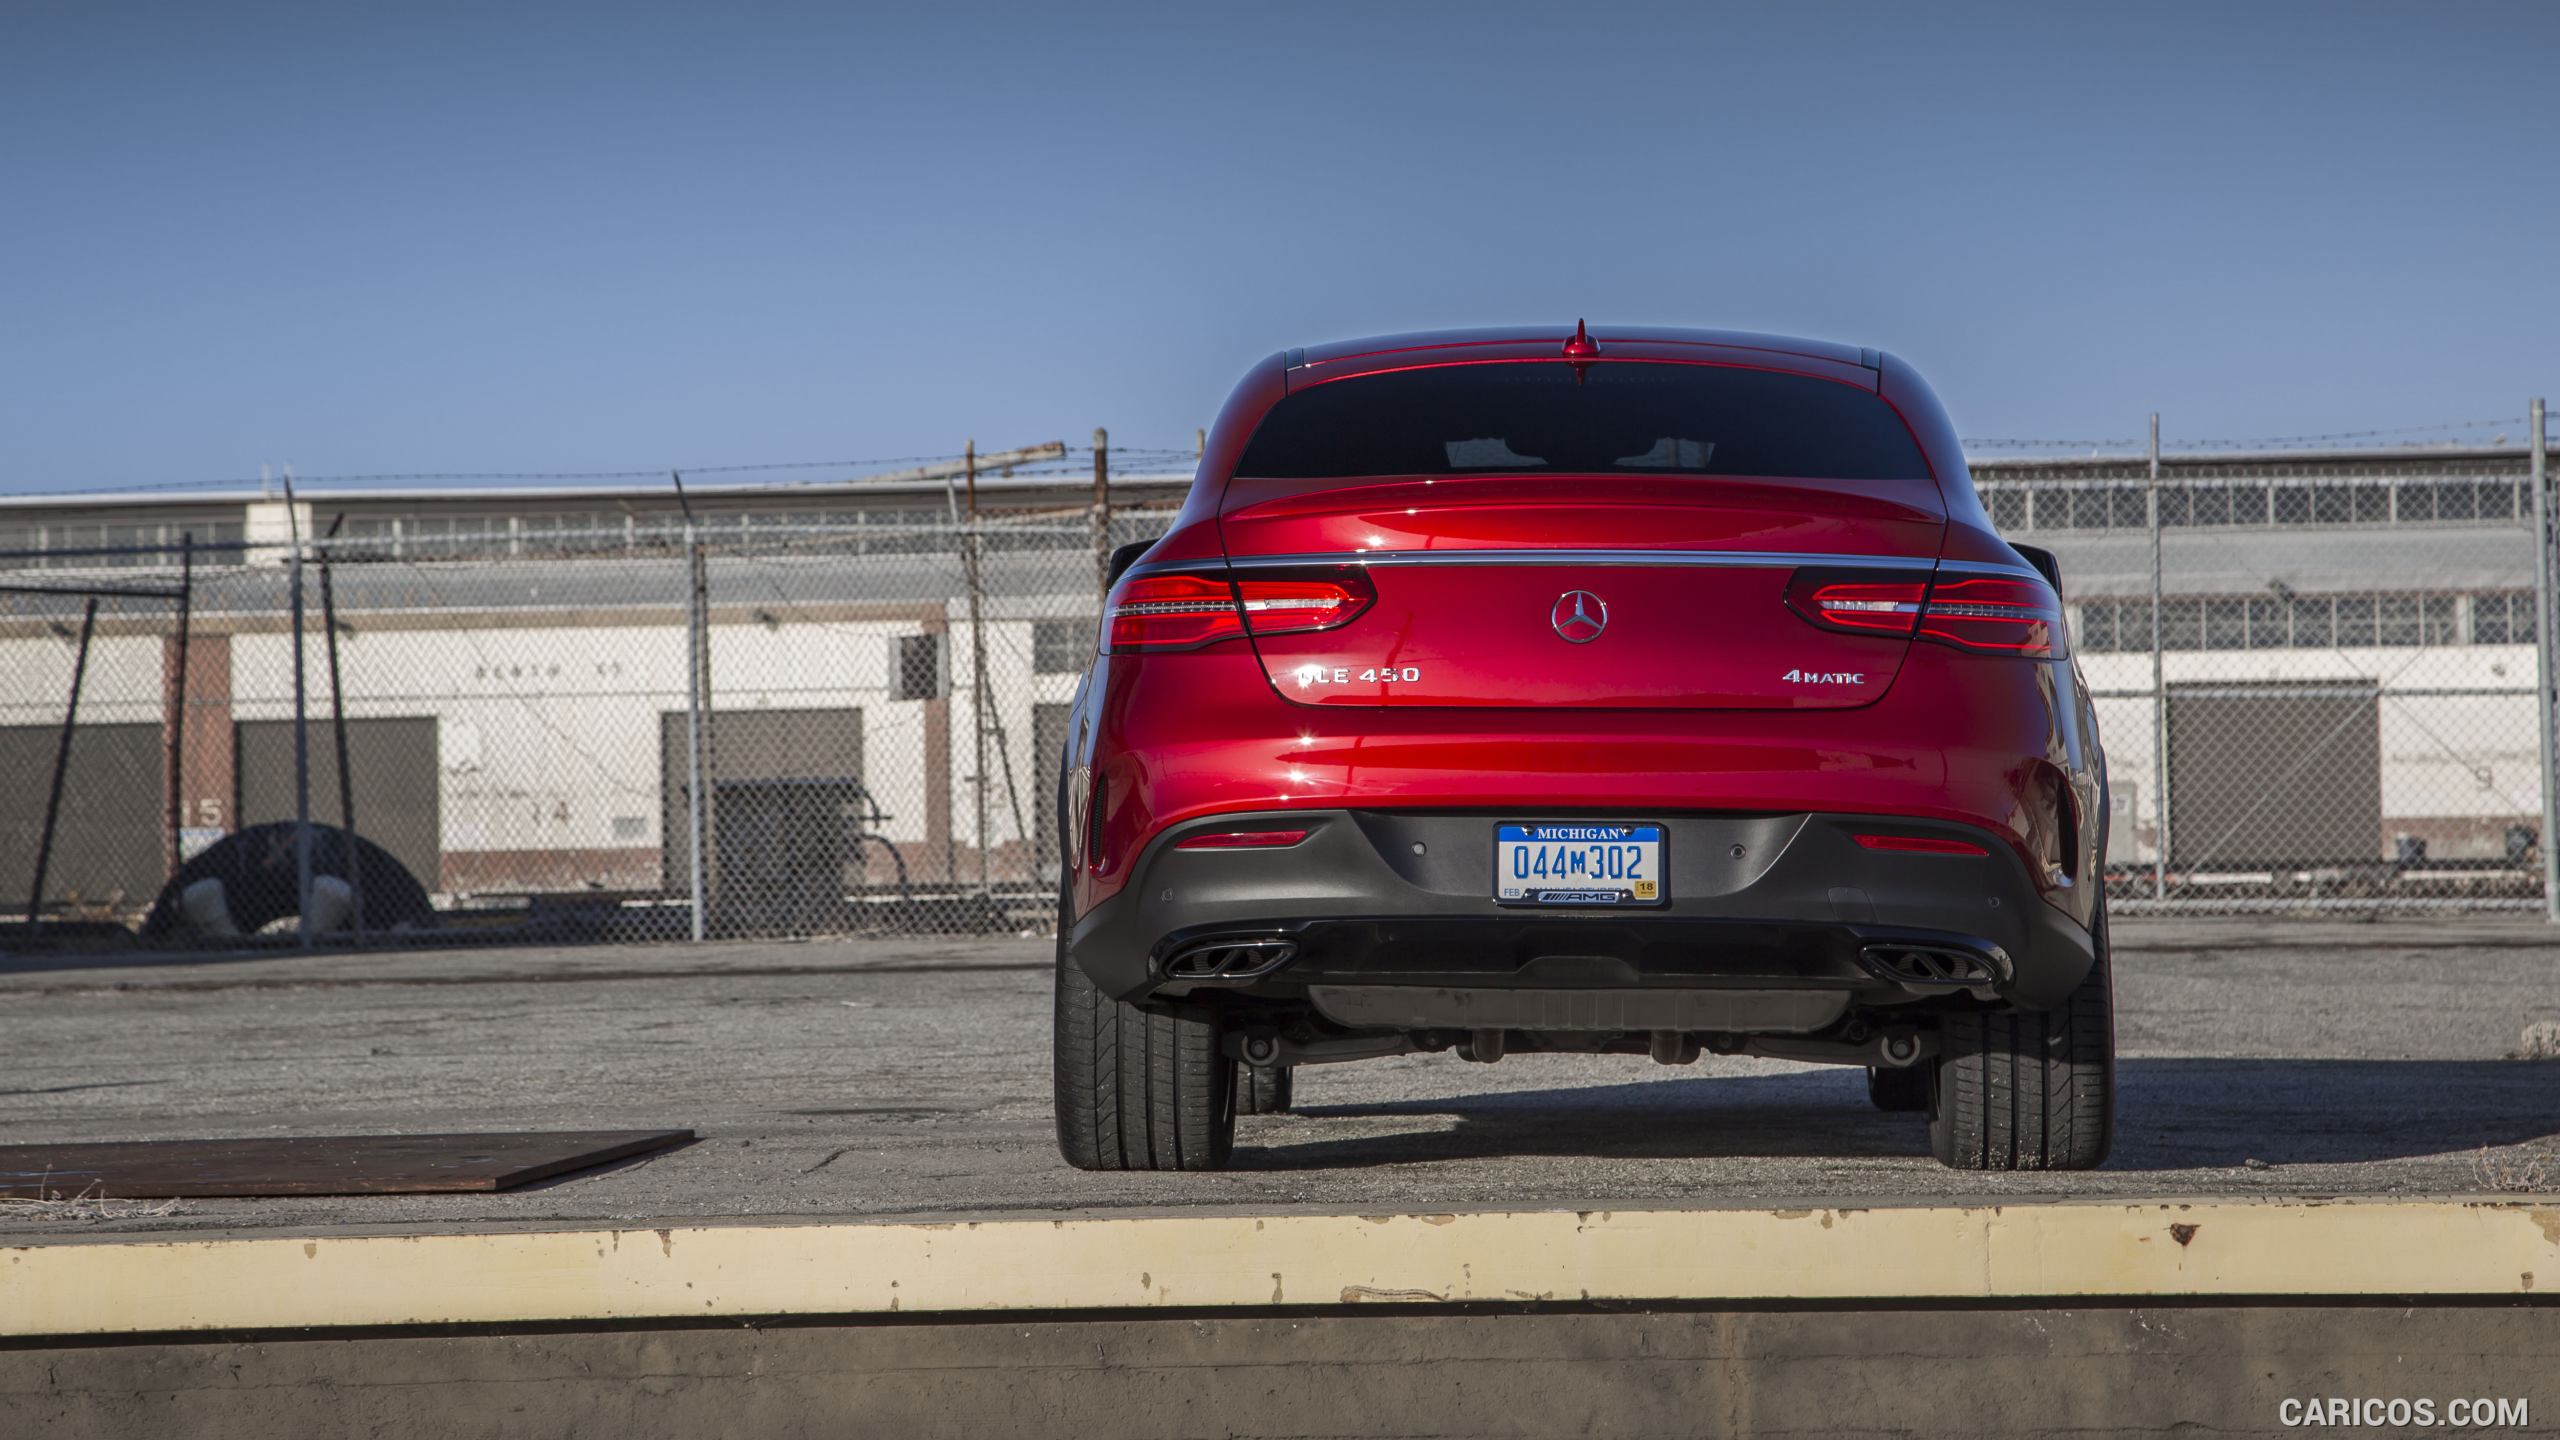 2016 Mercedes-Benz GLE 450 AMG Coupe 4MATIC (US-Spec) - Rear, #64 of 115